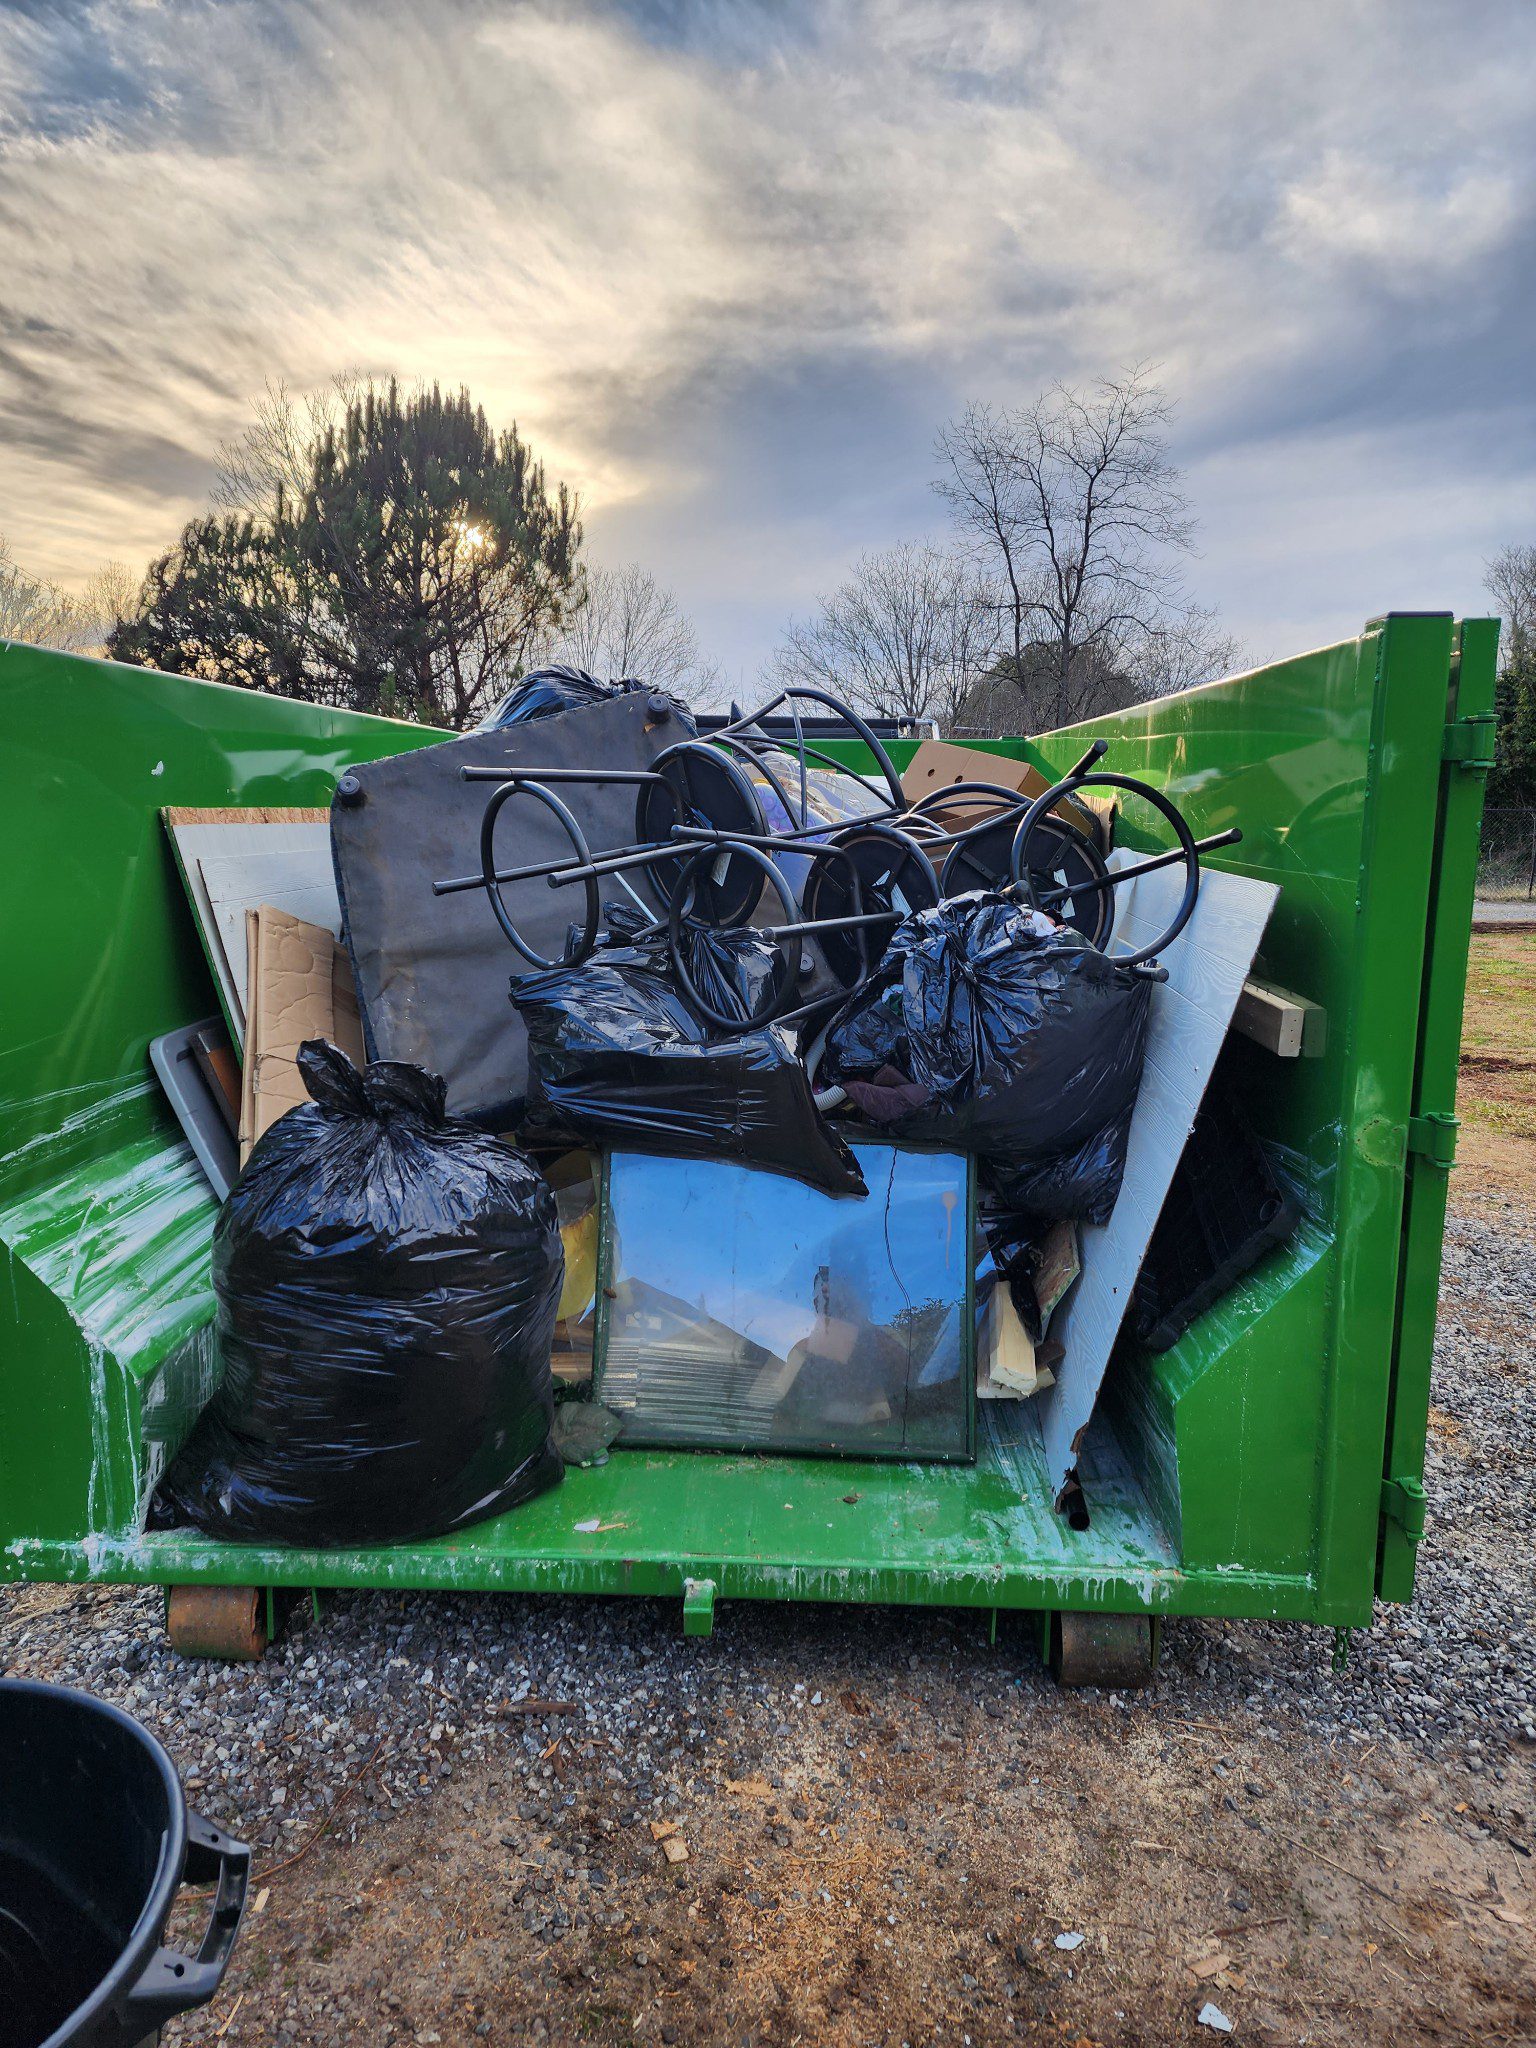 A green dumpster full of household garbage in an open field at sunset